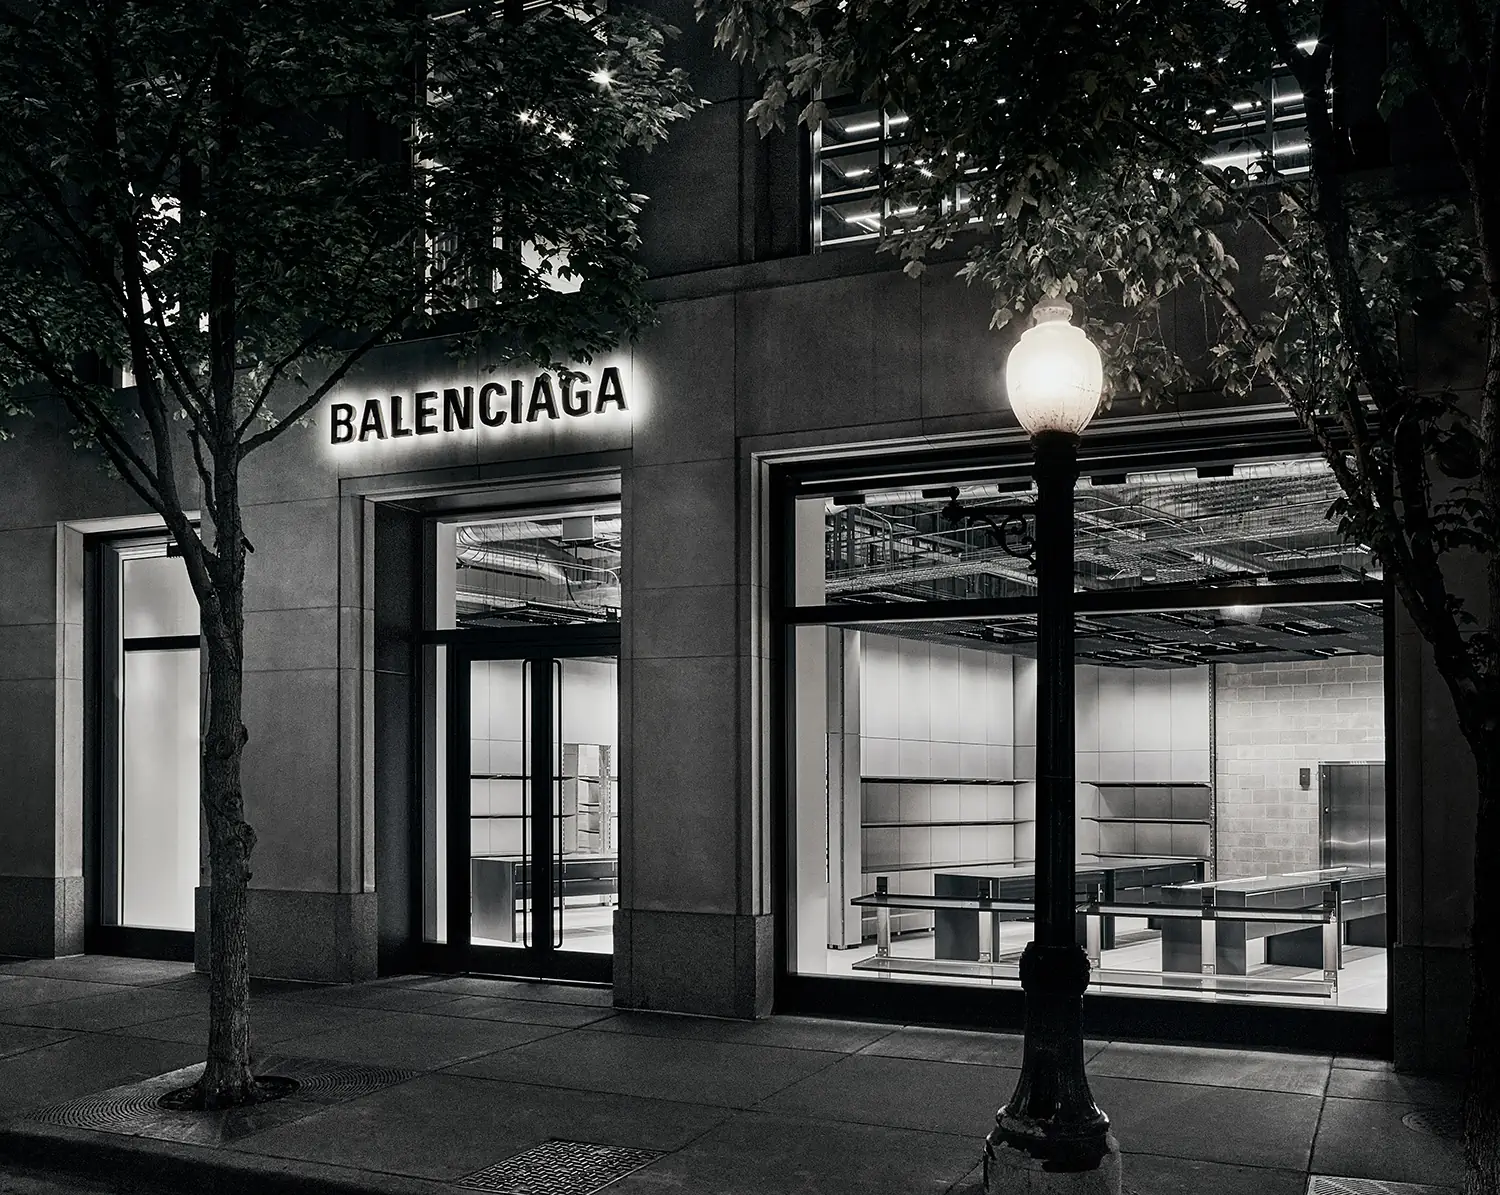 Balenciaga opens its first store in Chicago